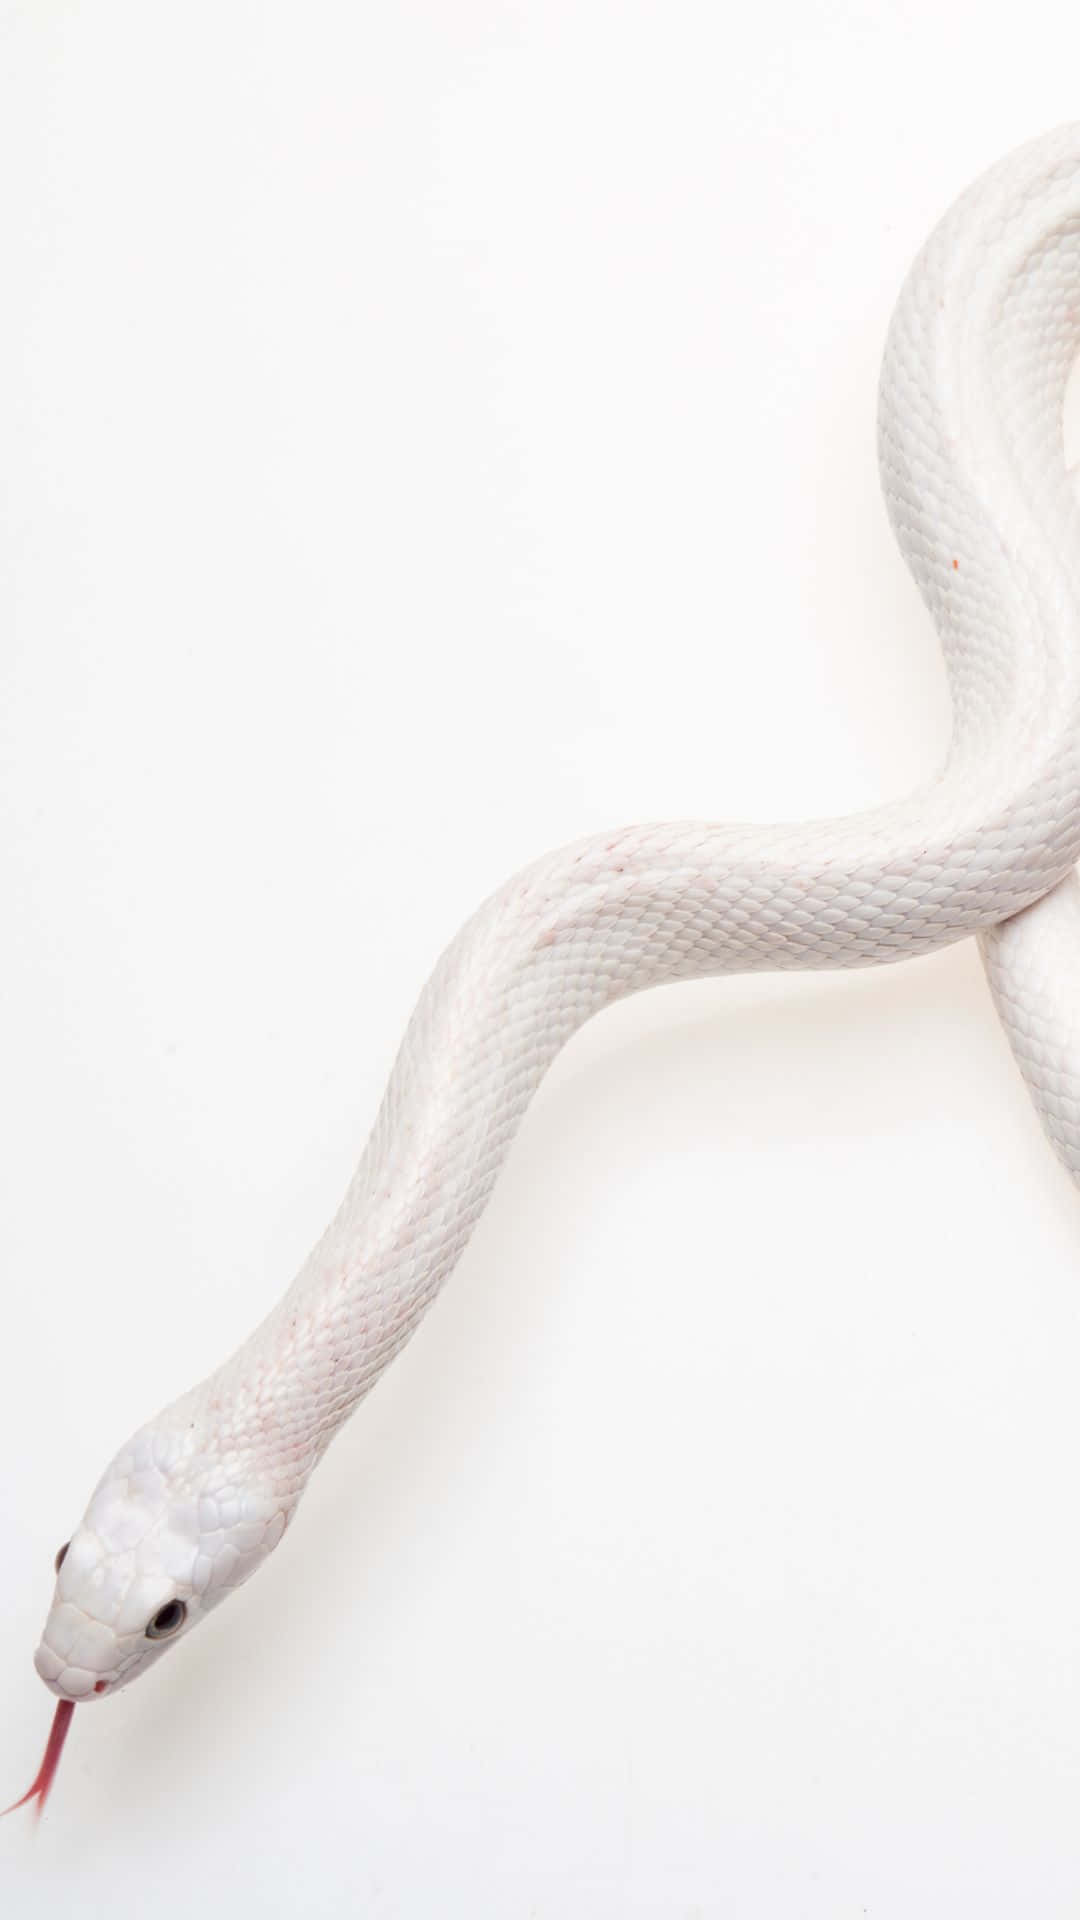 Cool Snake In Pure White Wallpaper